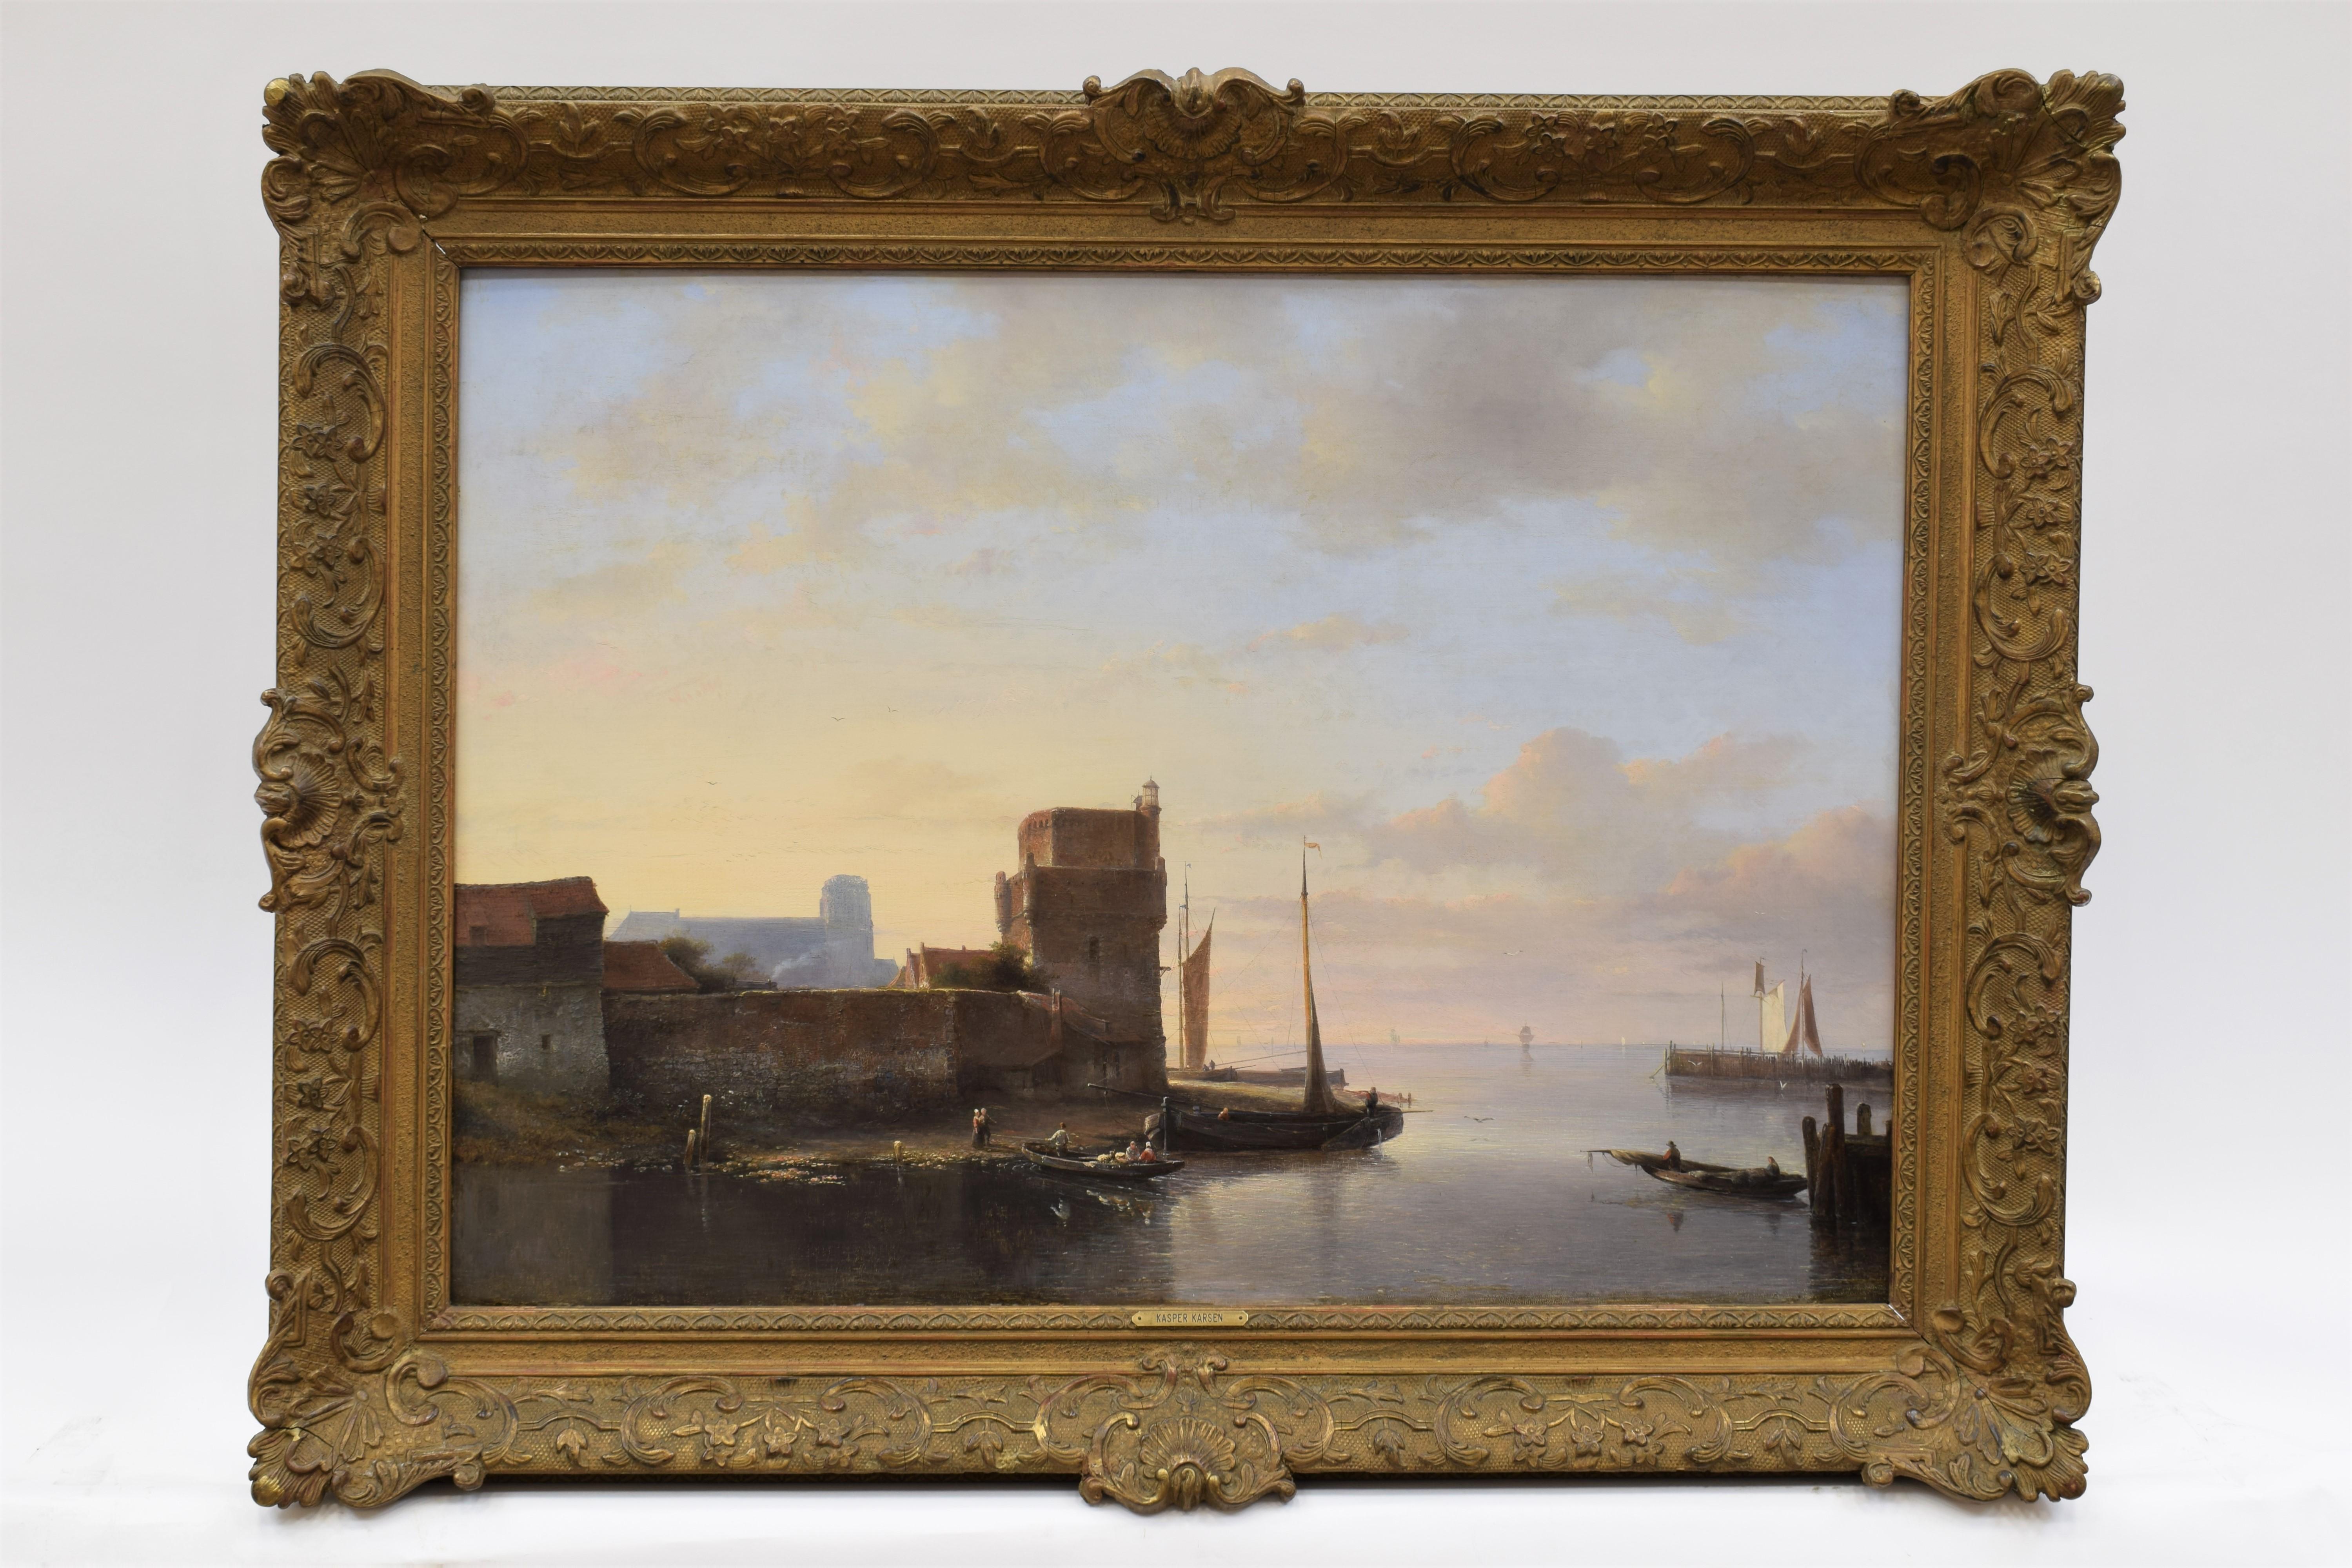 Townscape - Boats Waterfront Classic Art Oil Wood Panel Ornament Frame  - Painting by Kasper Karsen 